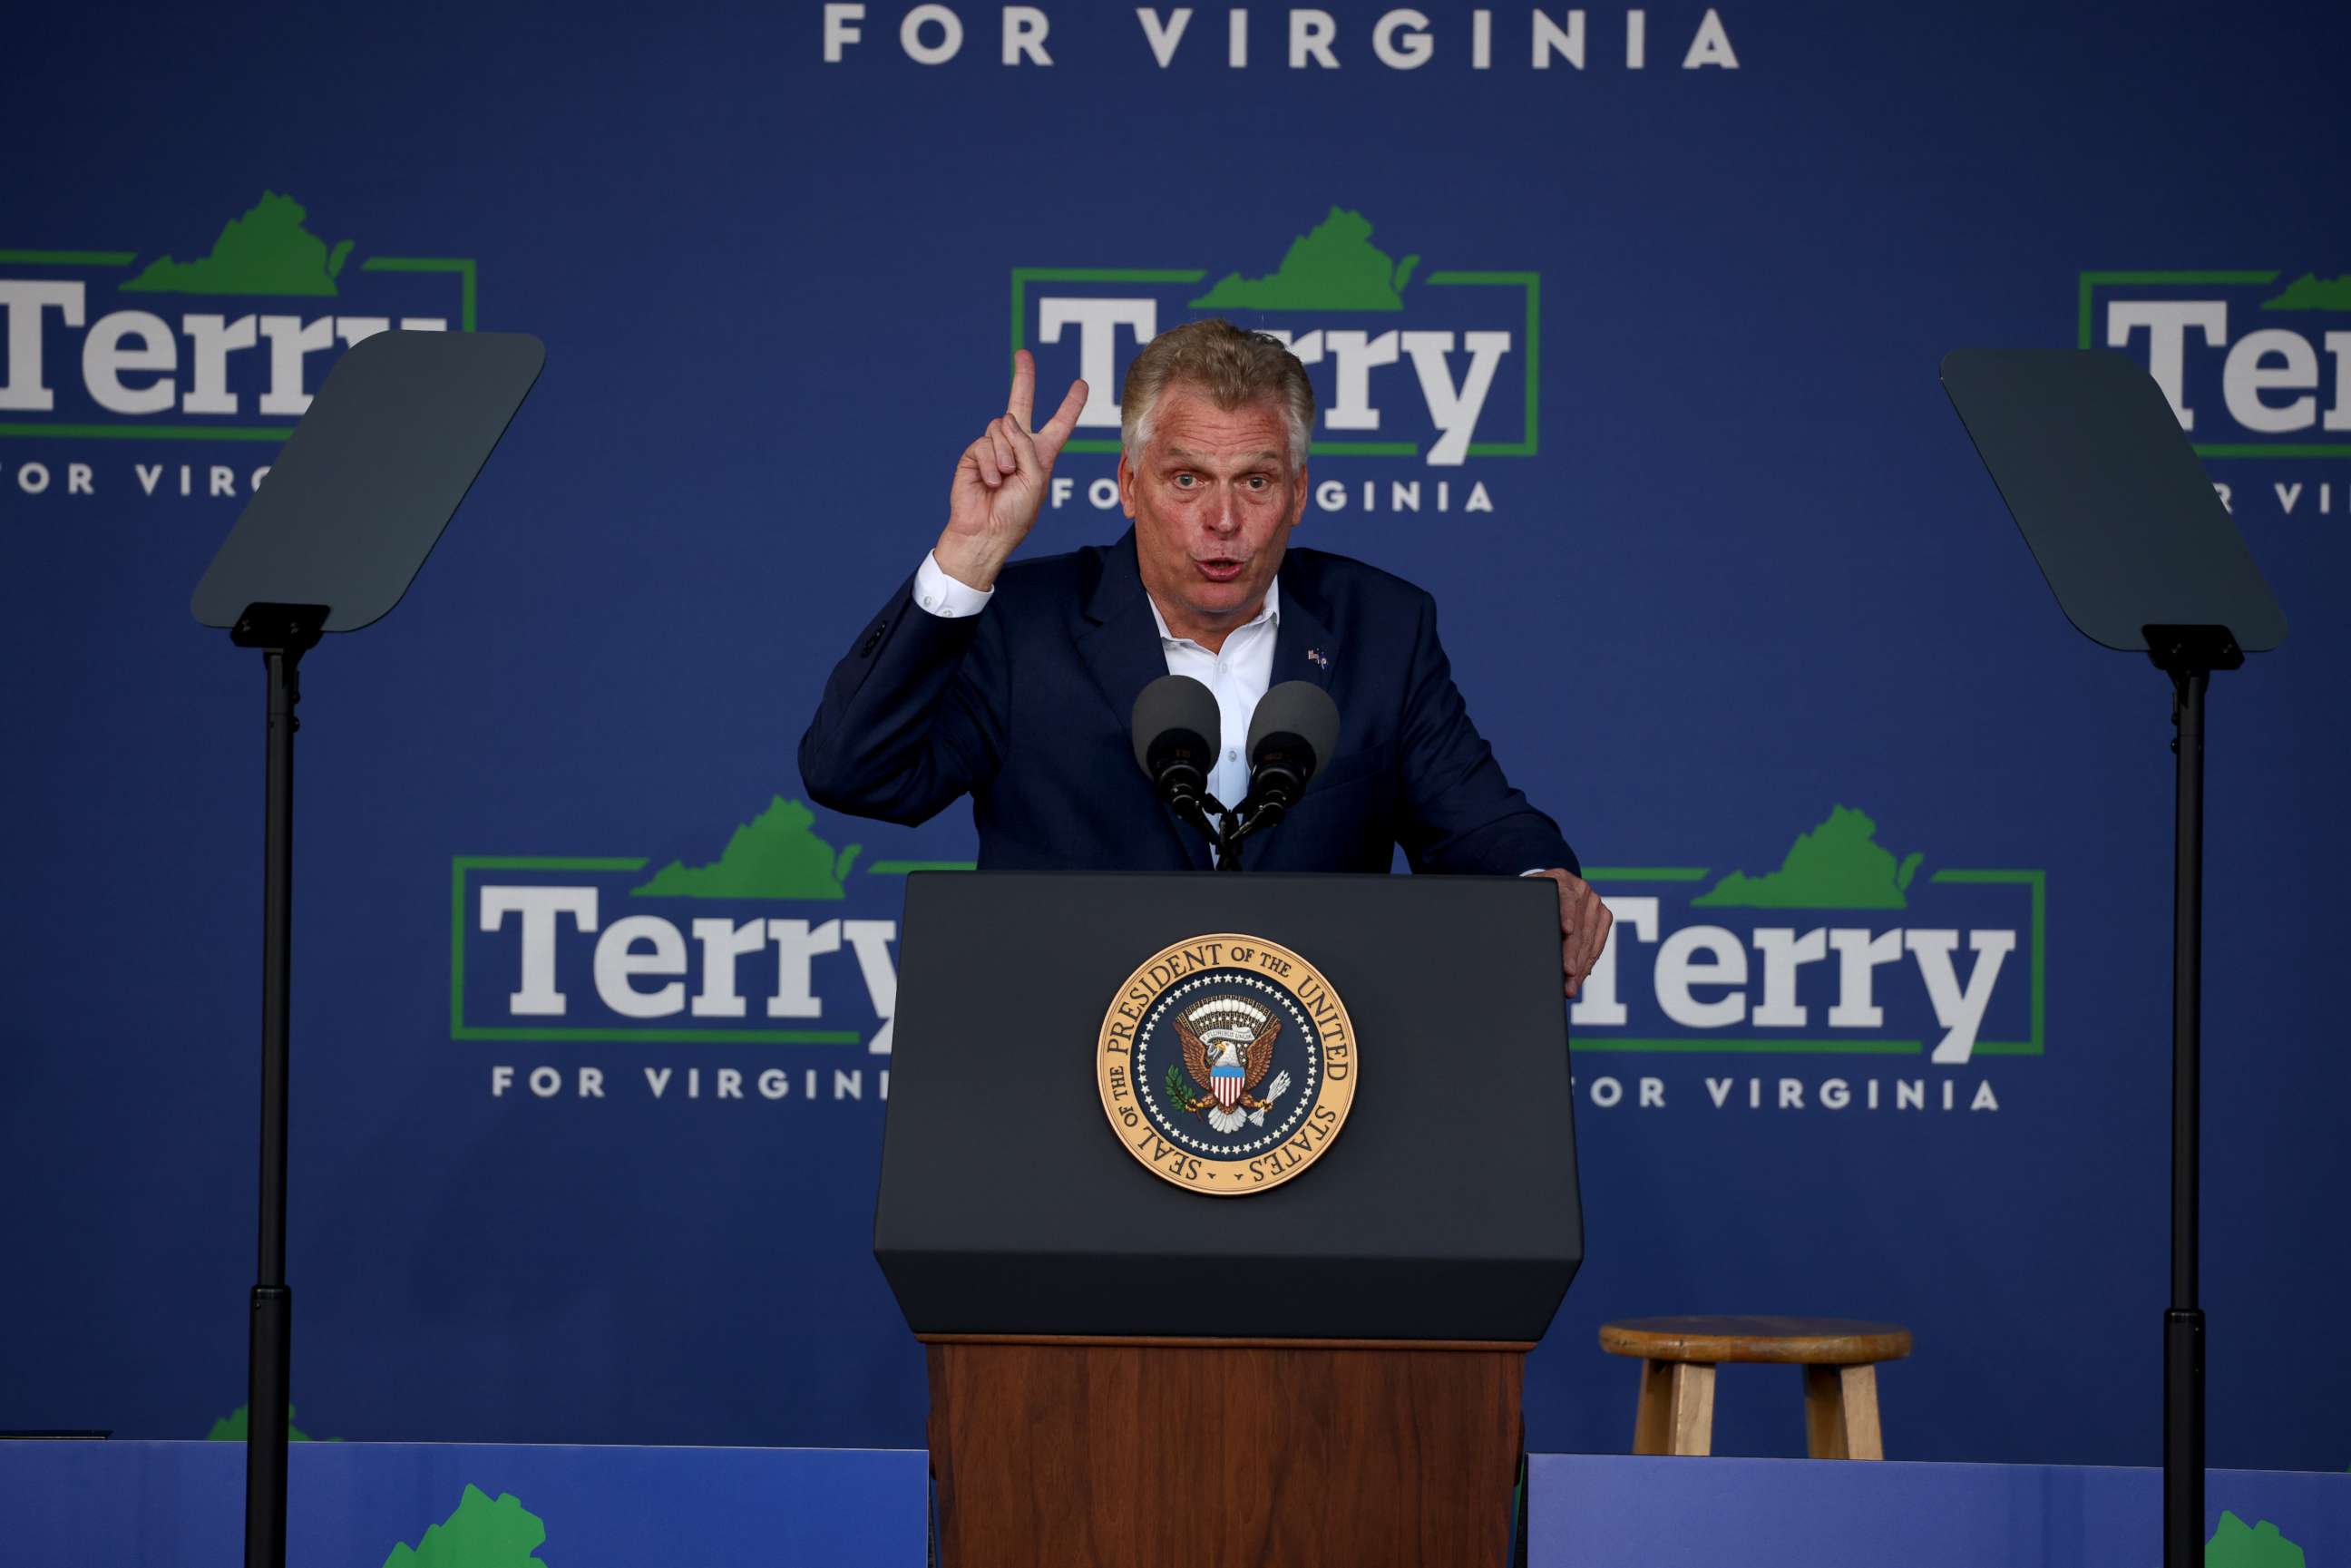 PHOTO: Virginia gubernatorial candidate Terry McAuliffe speaks at a campaign event at the Lubber Run Community Center on July 22, 2021, in Arlington, Va.